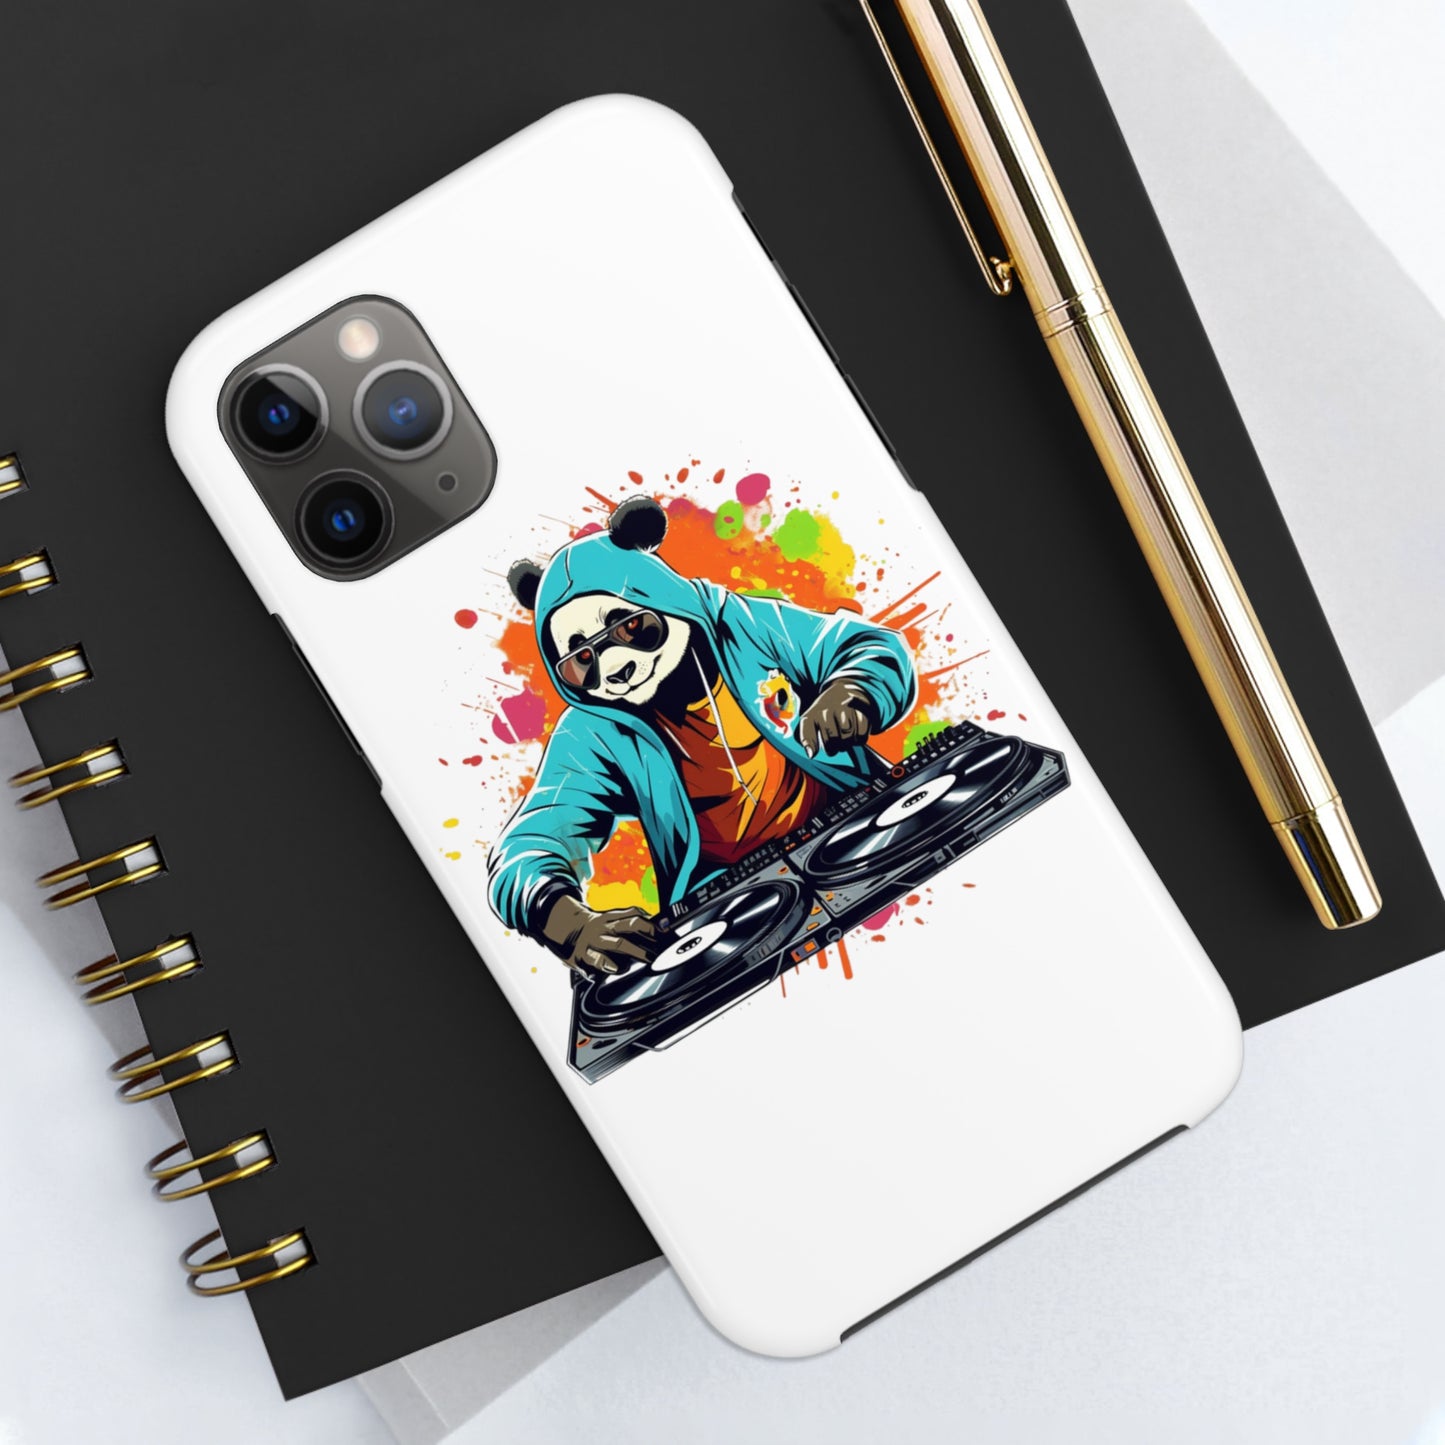 Panda DJ Phone Cases - Cool Cases for Your Phone